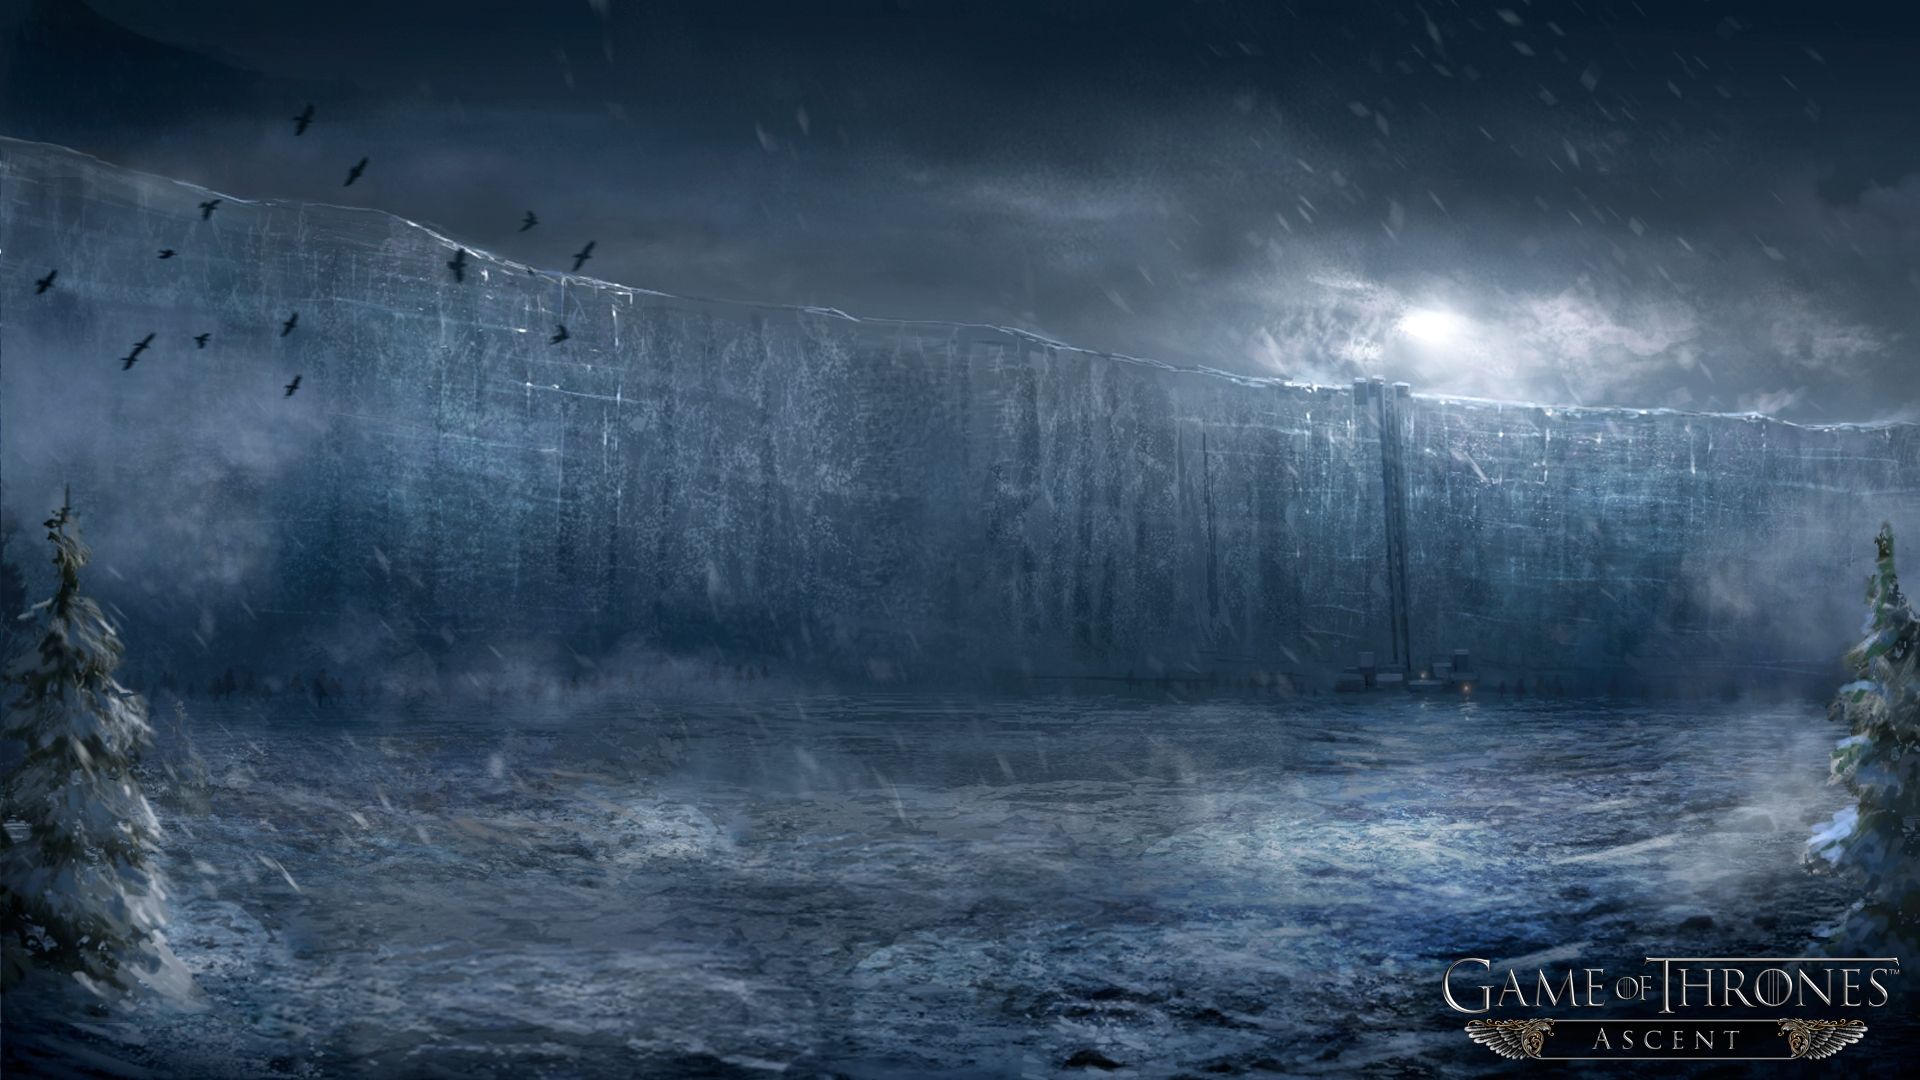 The Wall Game Of Thrones Image